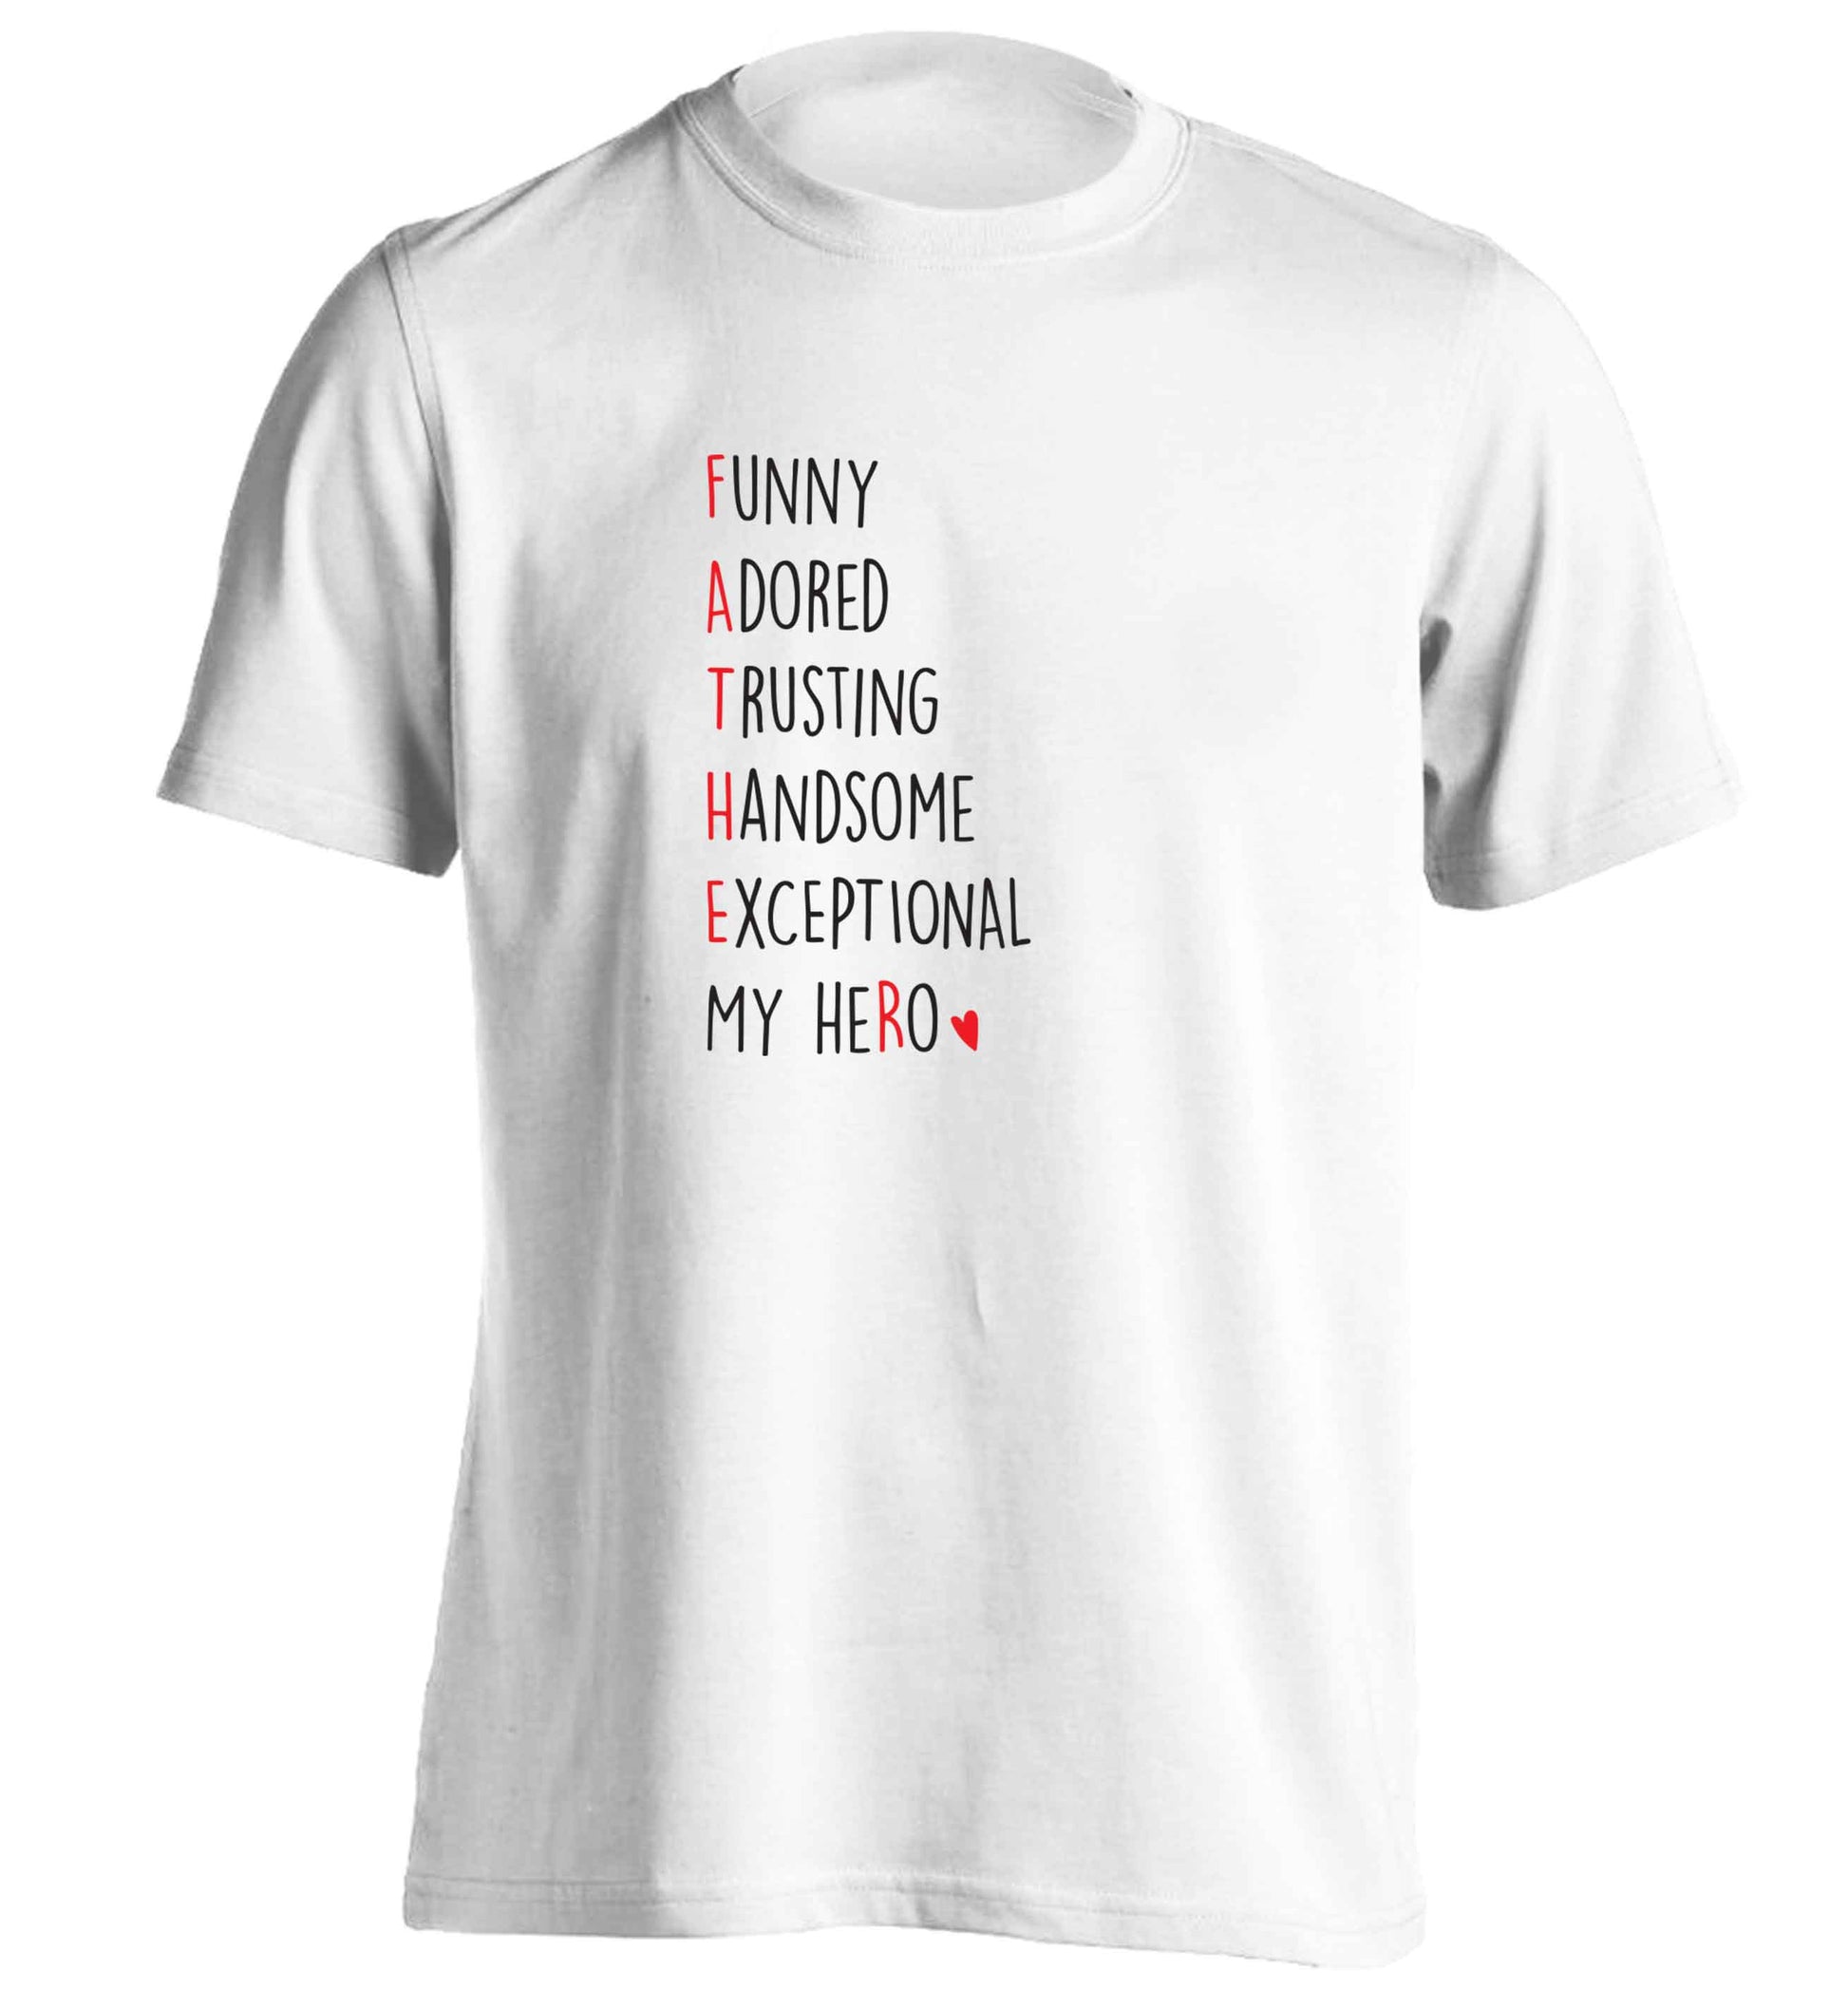 Father, funny adored trusting handsome exceptional my hero adults unisex white Tshirt 2XL